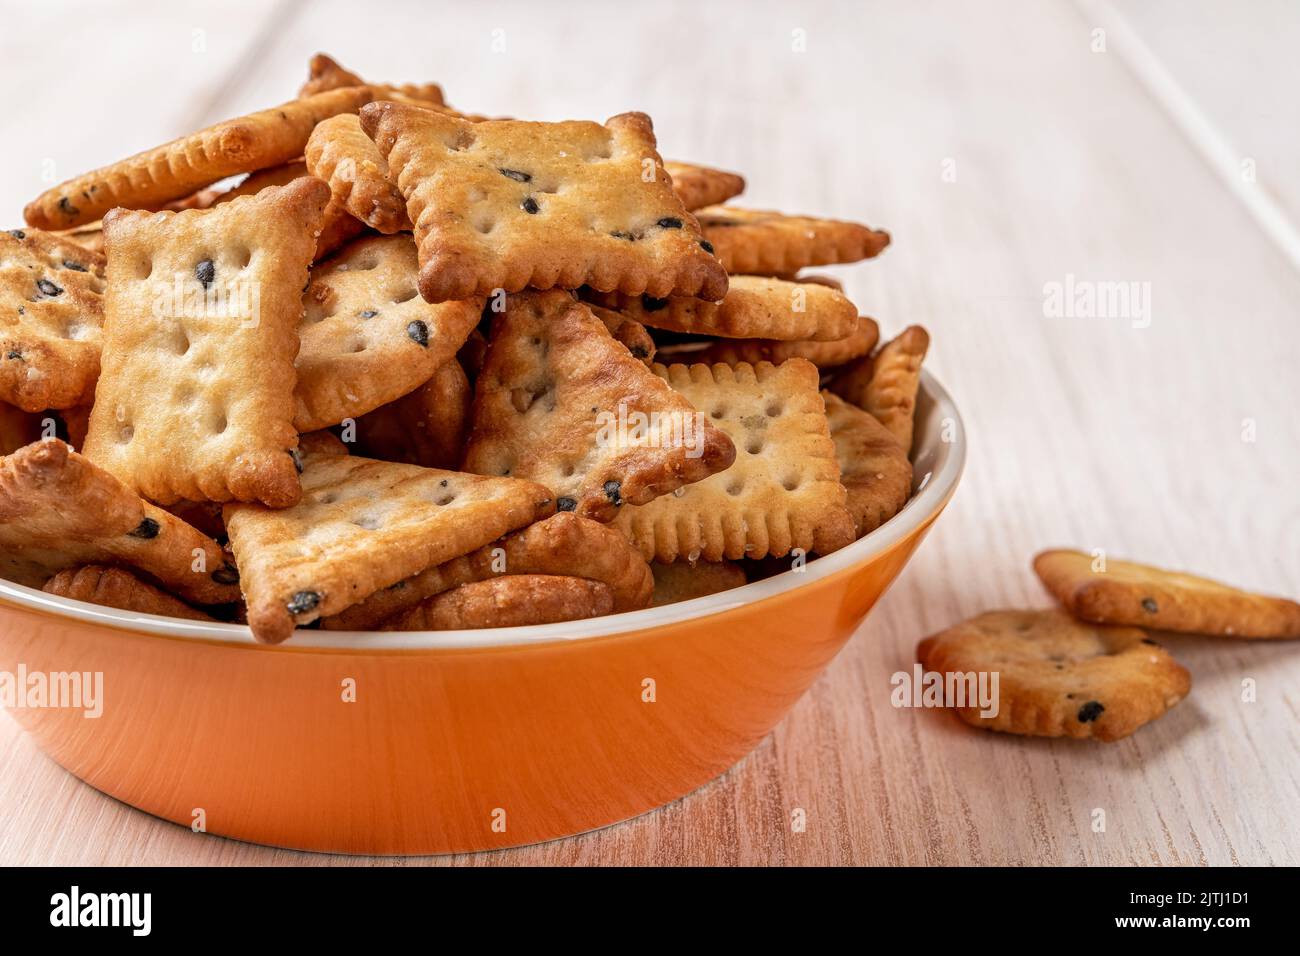 Saltine crackers in an orange bowl on a white wood table. Deep plate full of salty crackers with black and white sesame seeds close-up. Ready to eat. Stock Photo